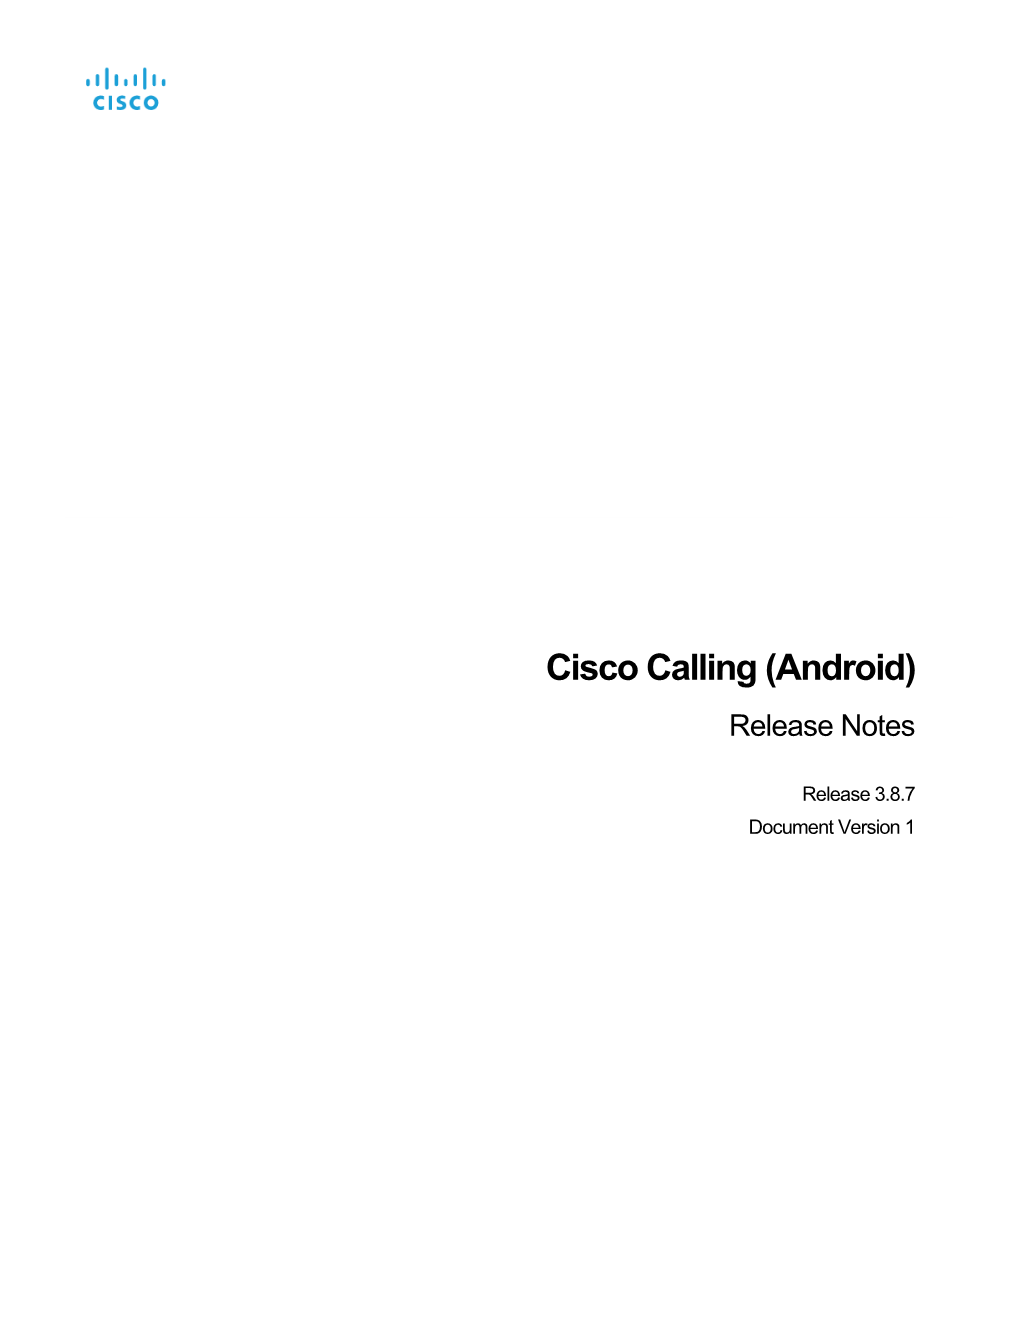 Cisco Calling (Android) Release Notes